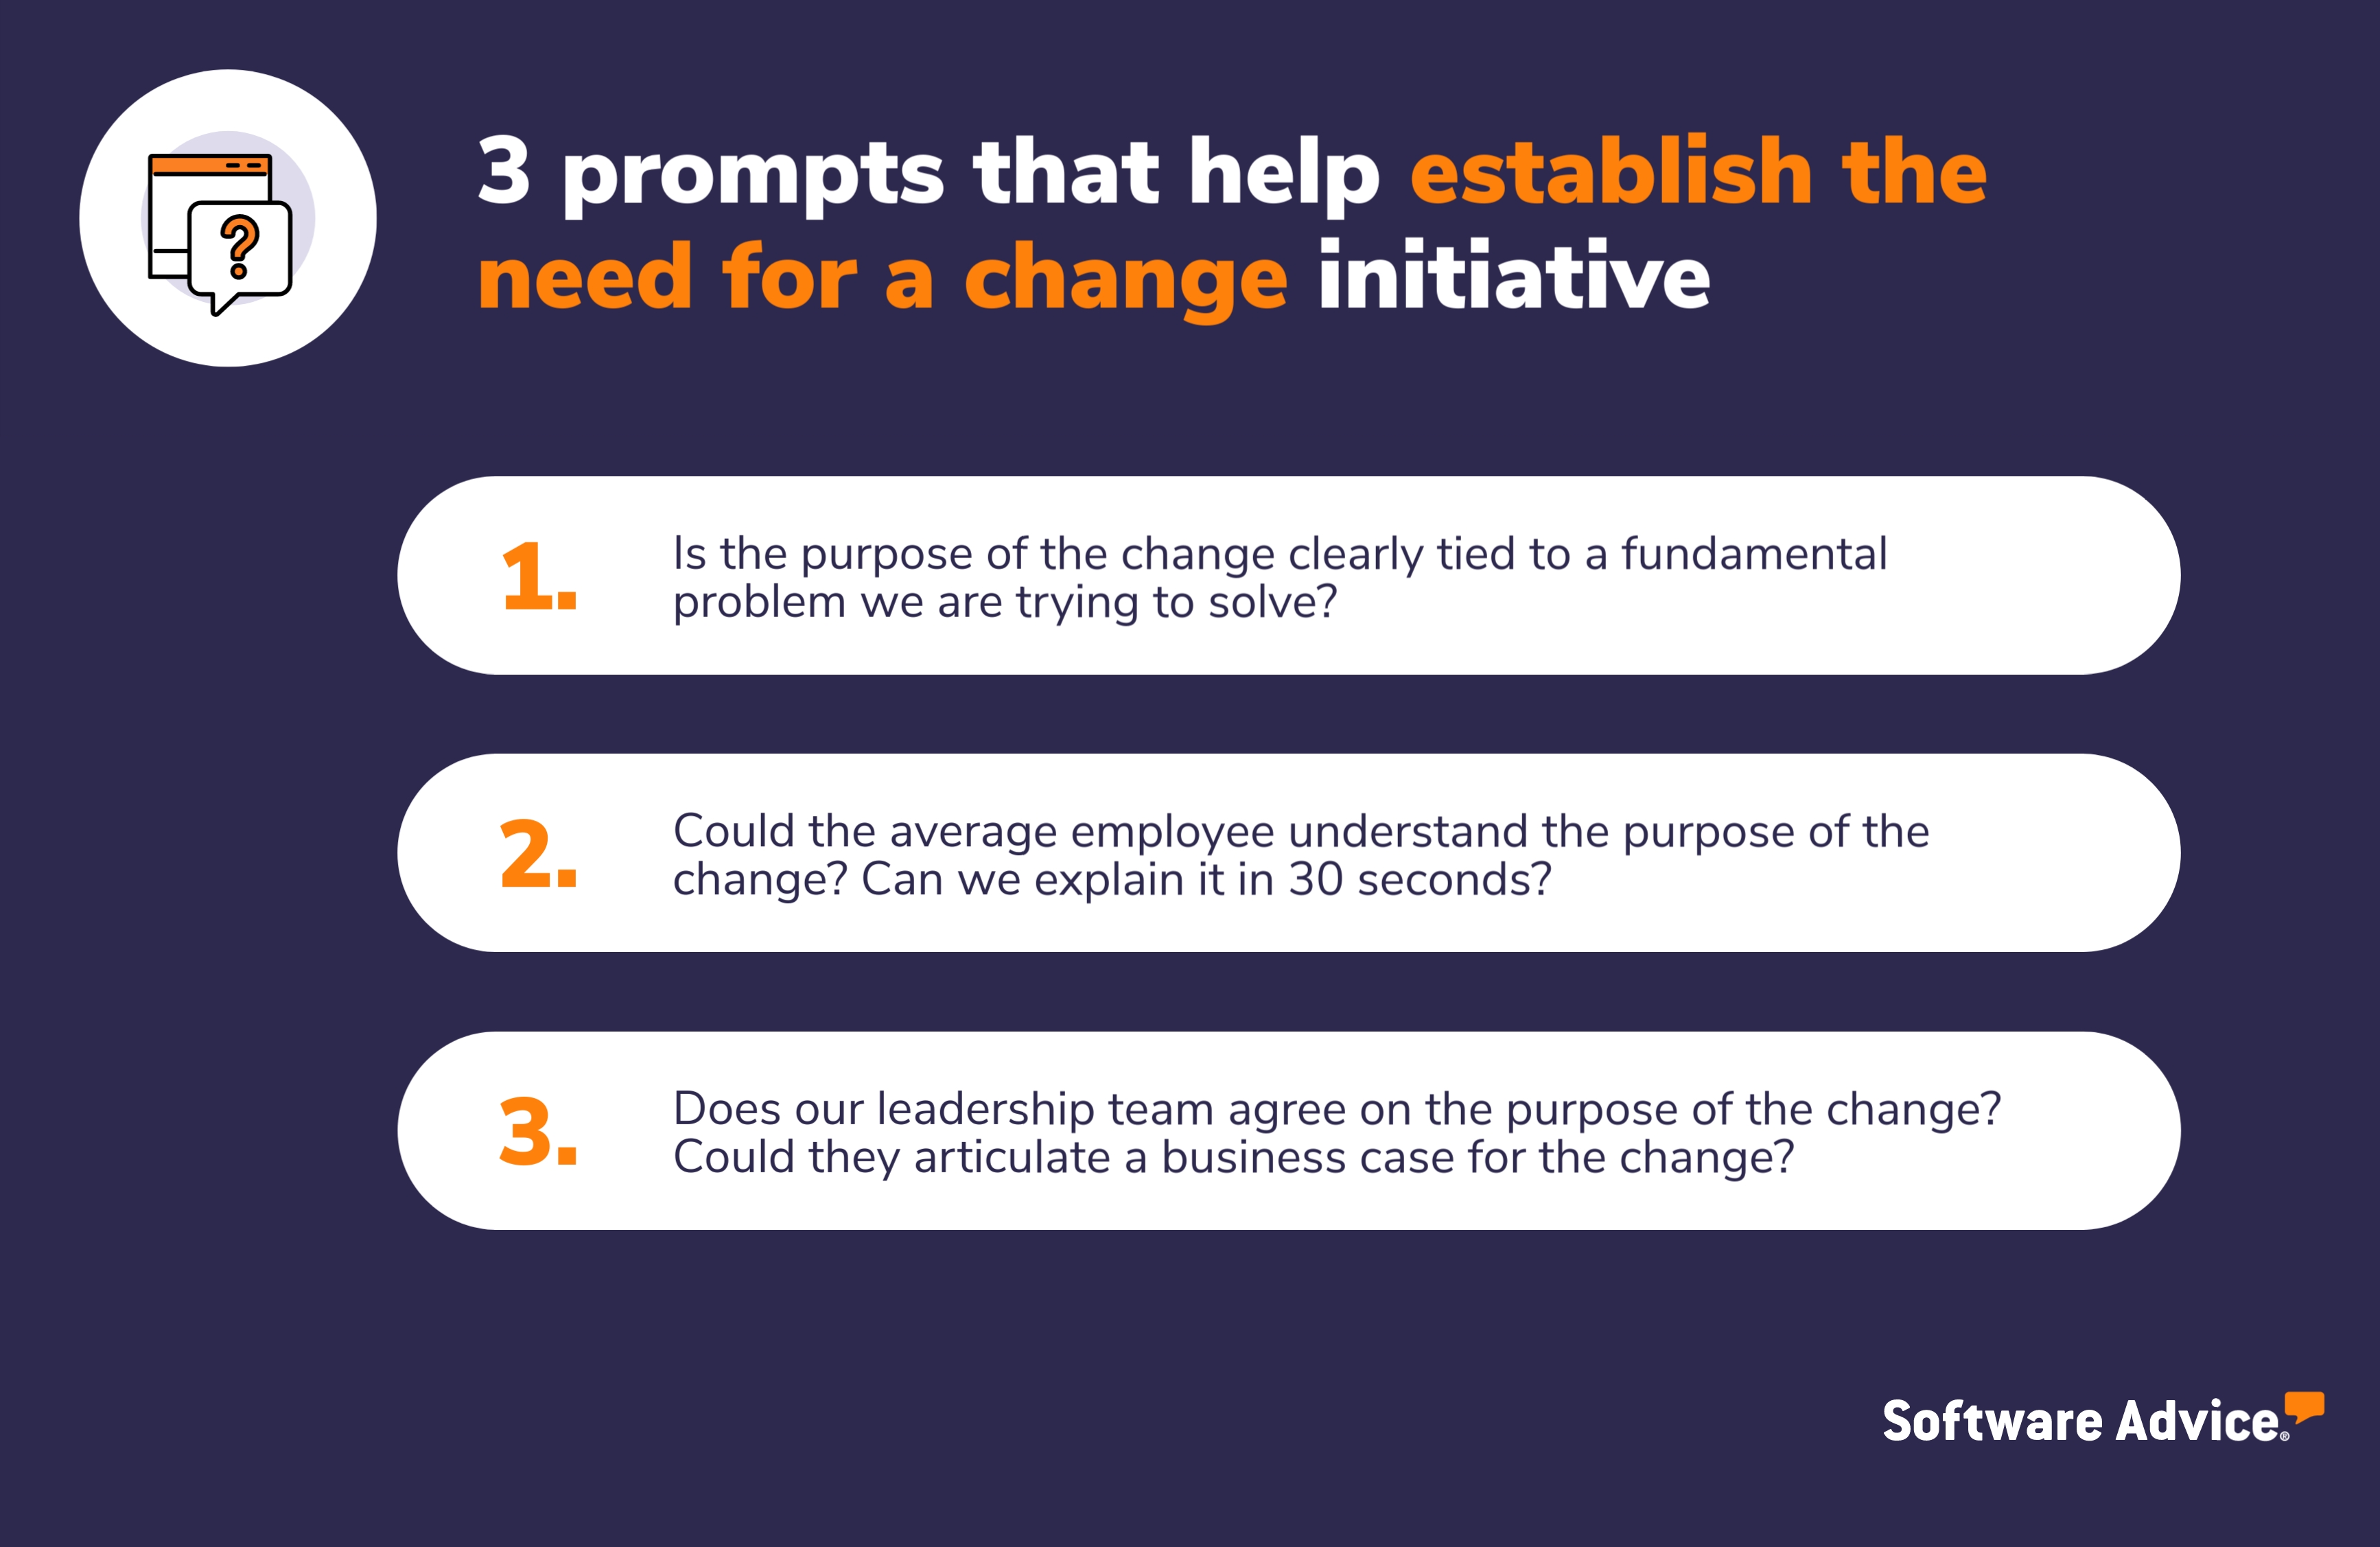 3 prompts that help establish the need for a change initiative